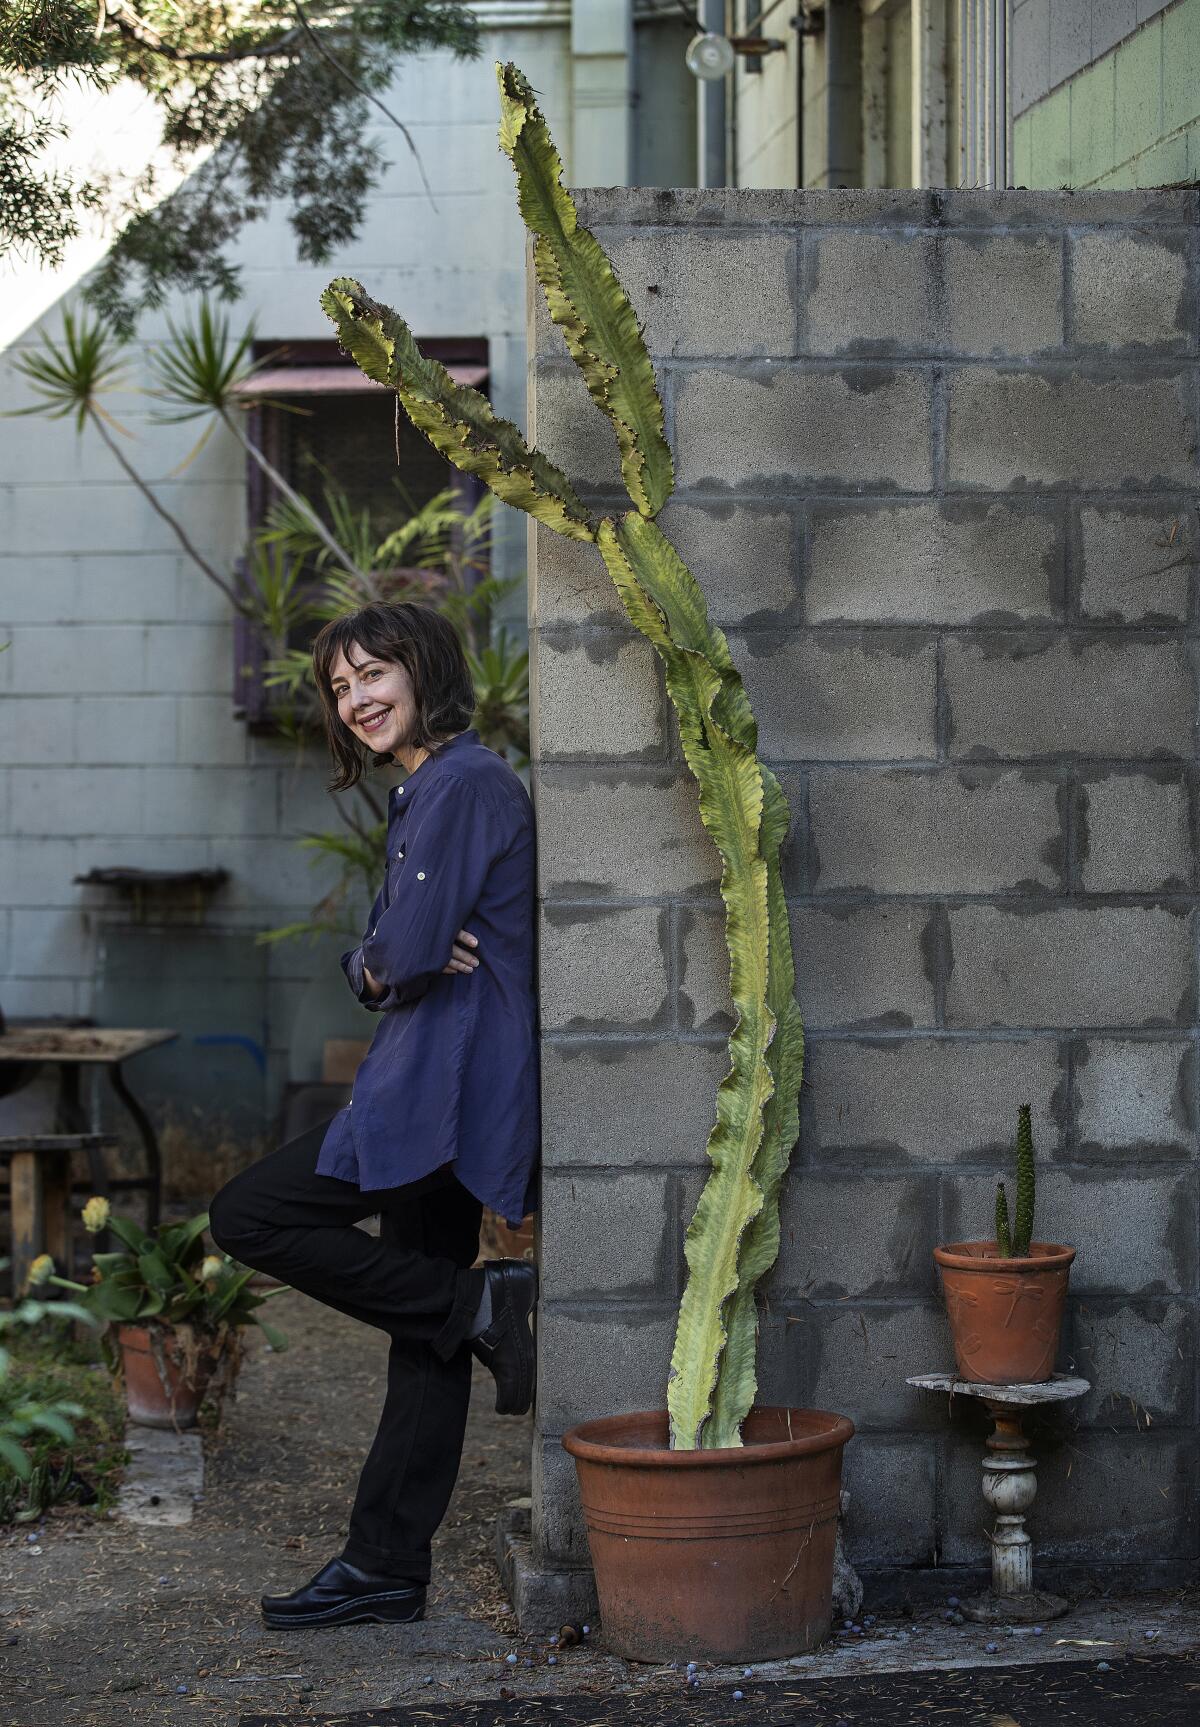 Painter Linda Stark, framed by cactus, leans against a cinderblock wall in her garden.